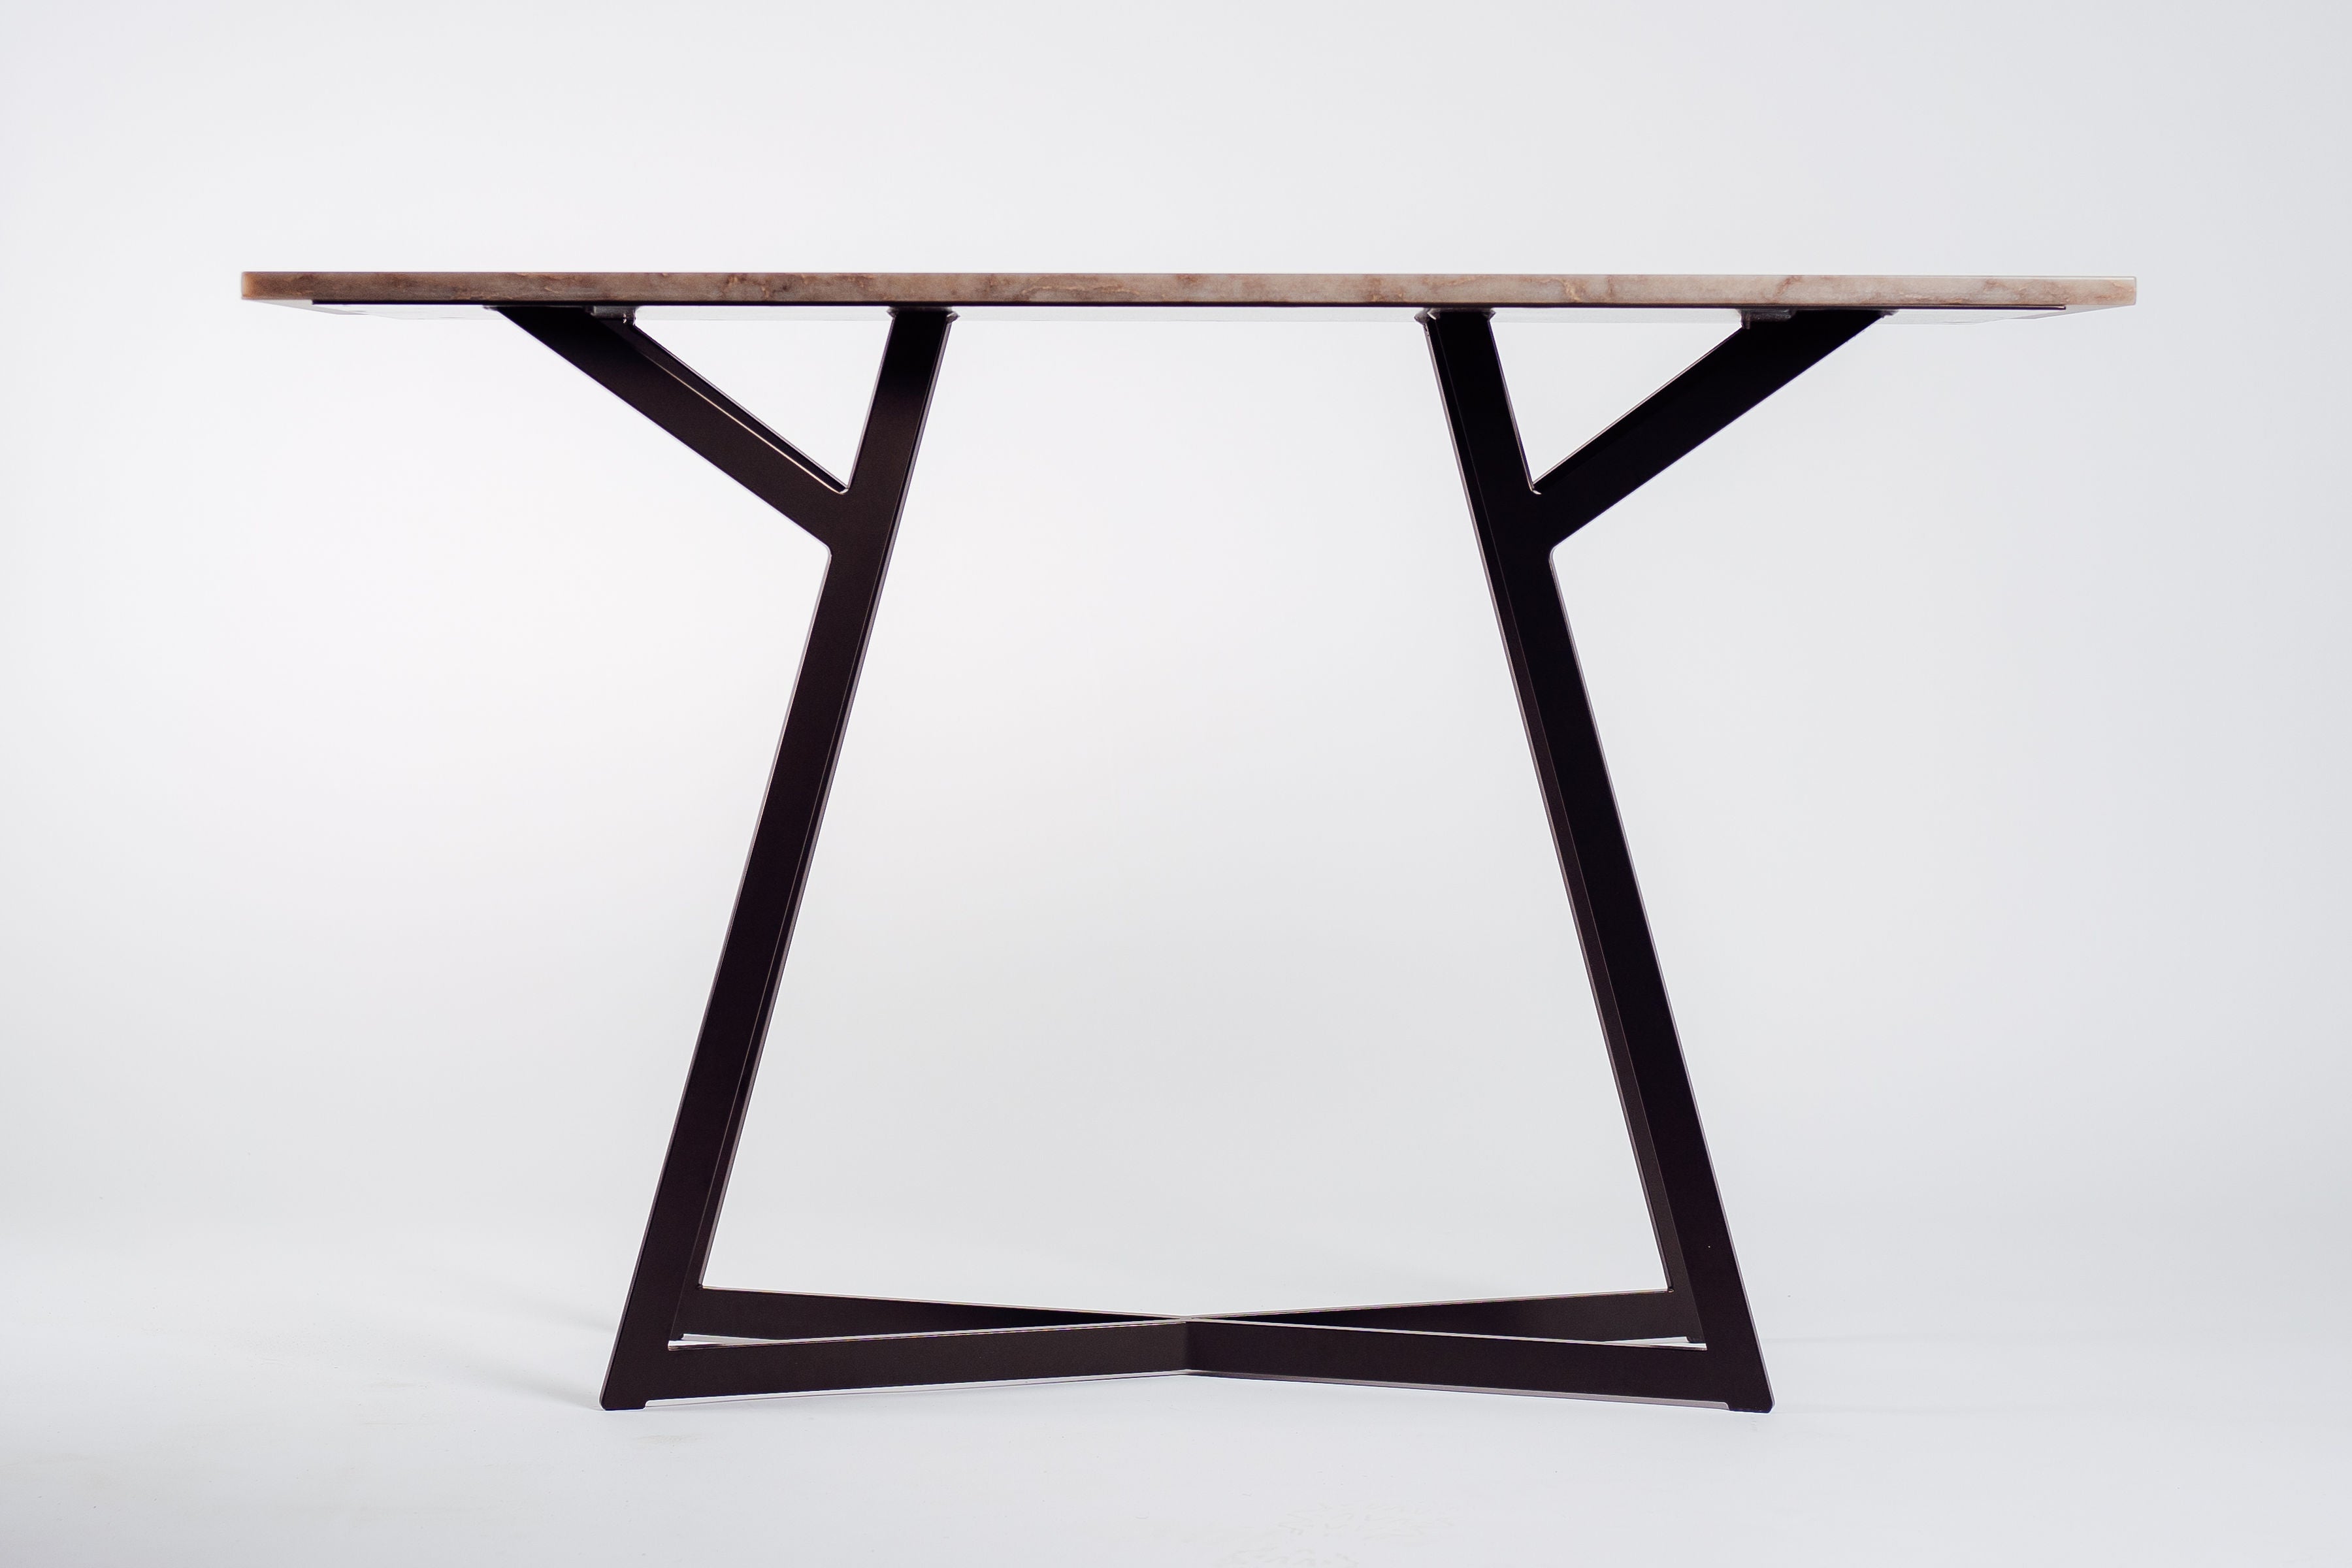 Paula Console Table by Hunt & Noyer